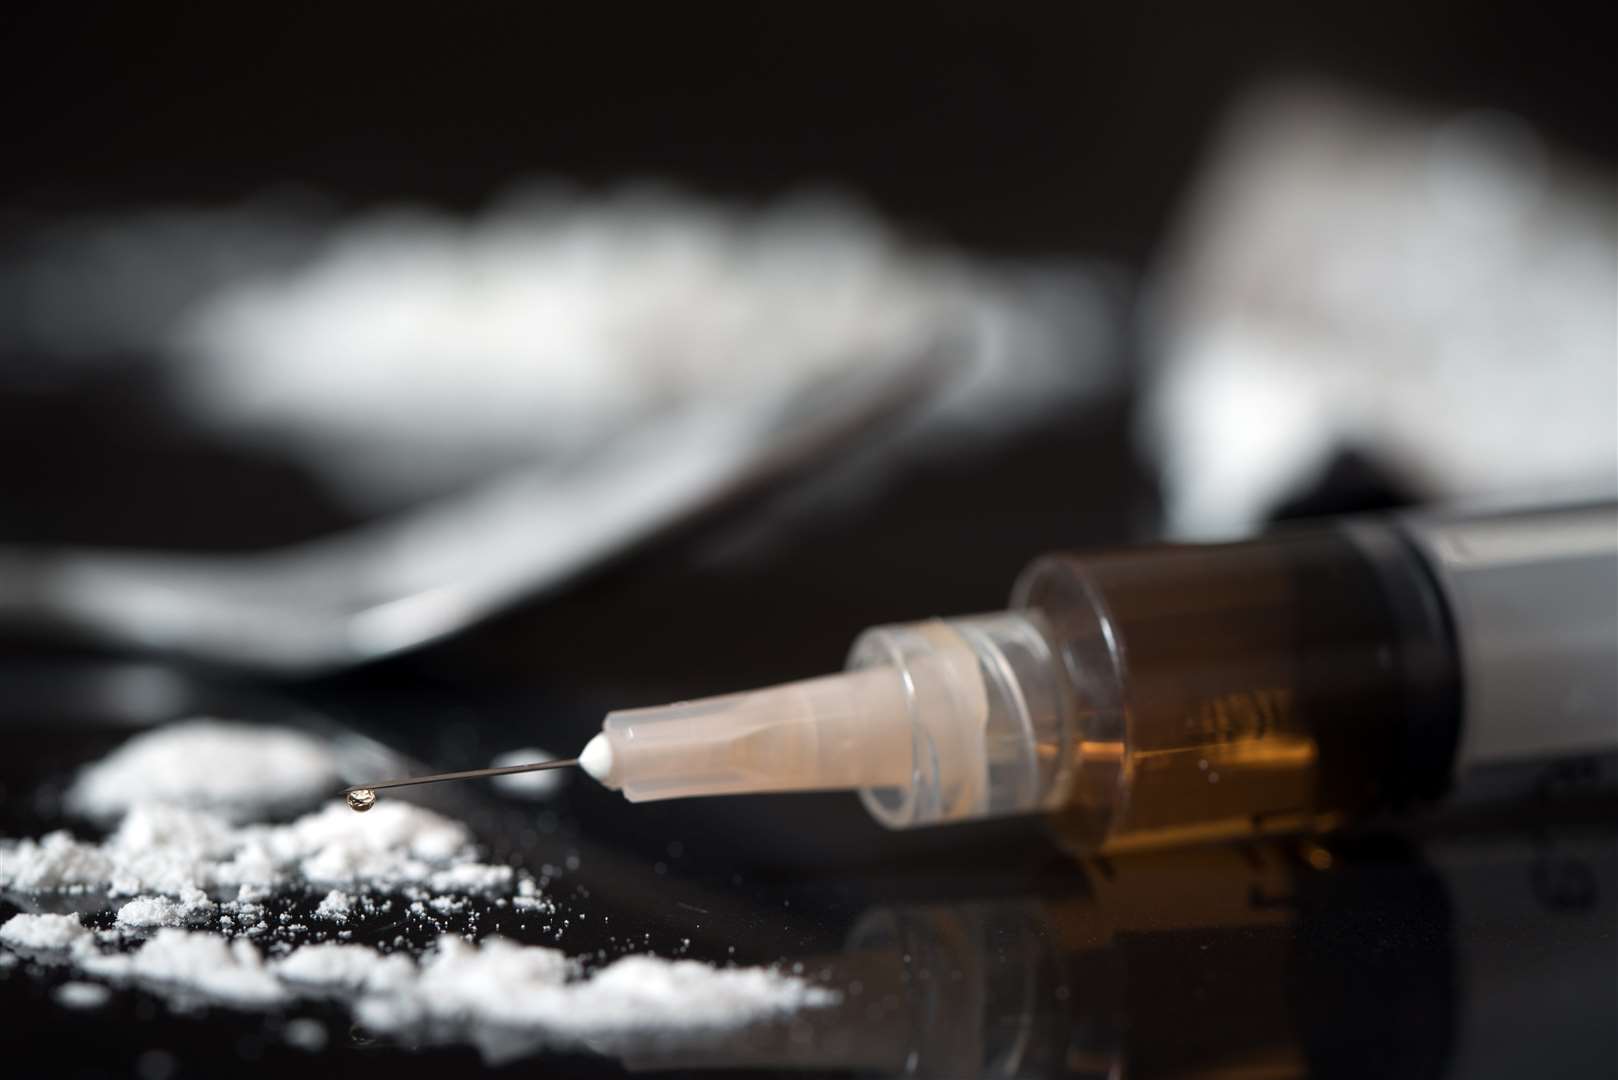 The gang was dealing heroin and cocaine in Medway